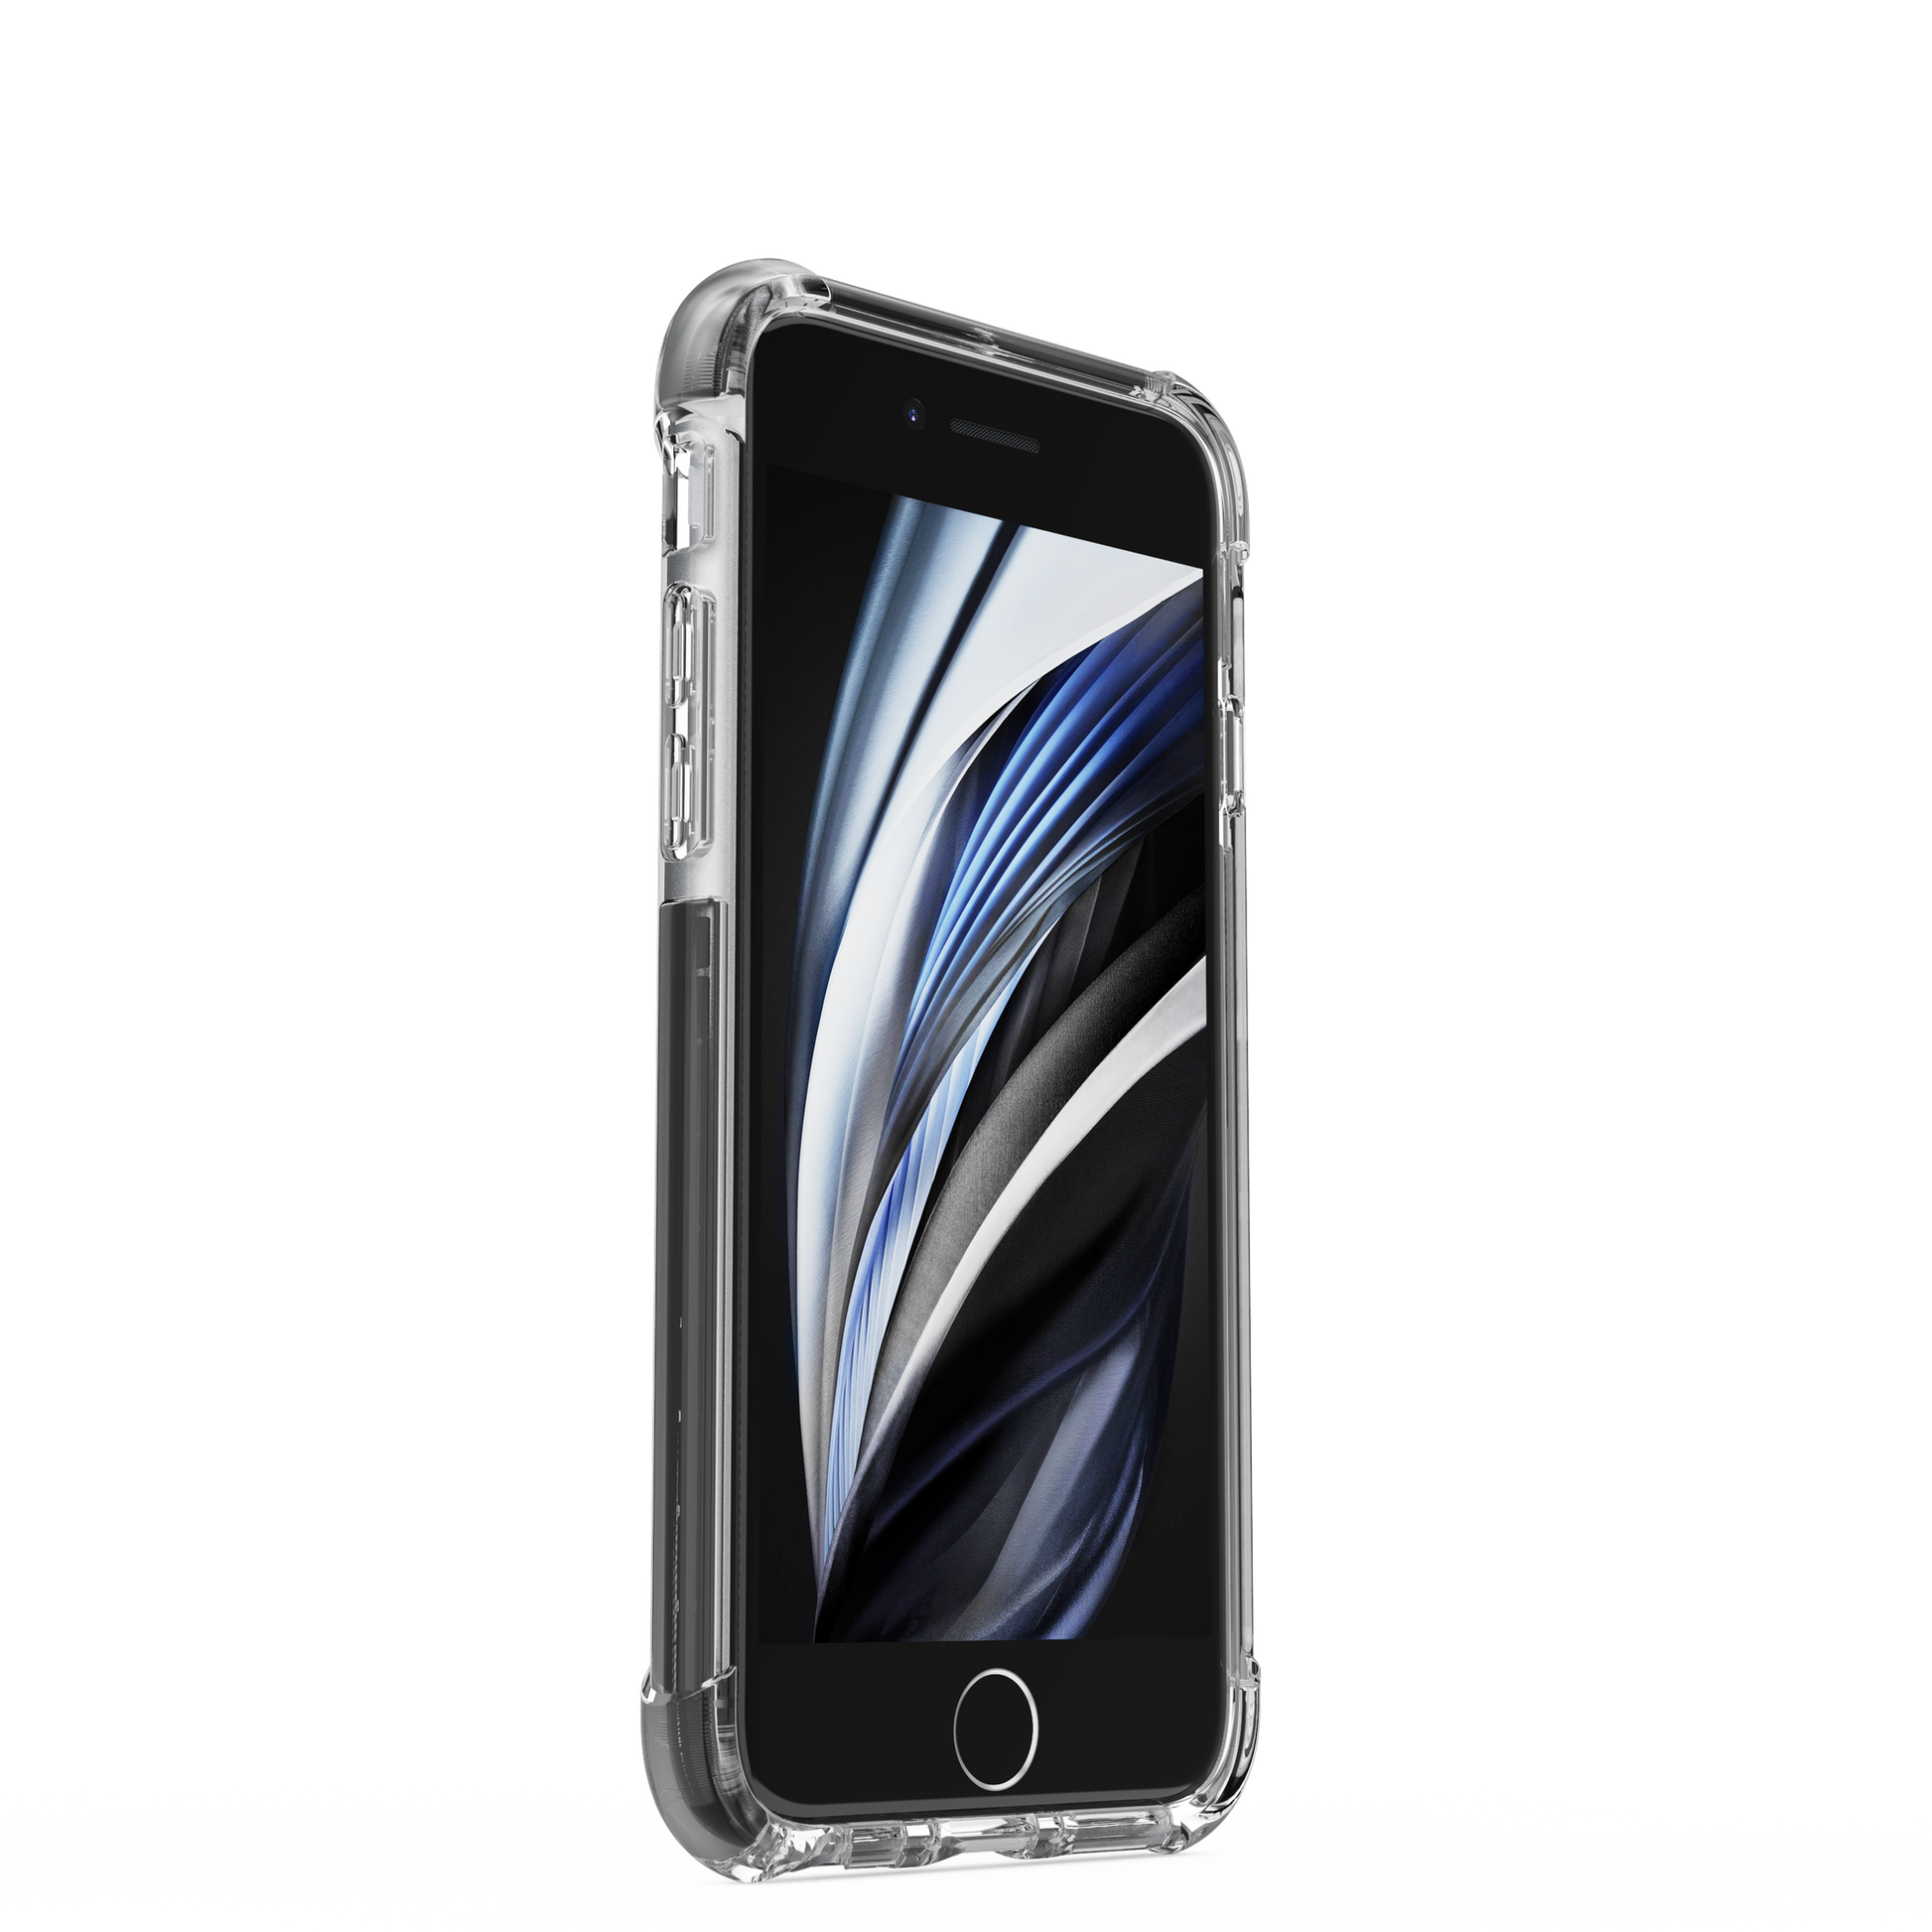 MoArmouz - Shockproof Case for iPhone SE (3rd / 2nd Gen), iPhone 8 and iPhone 7